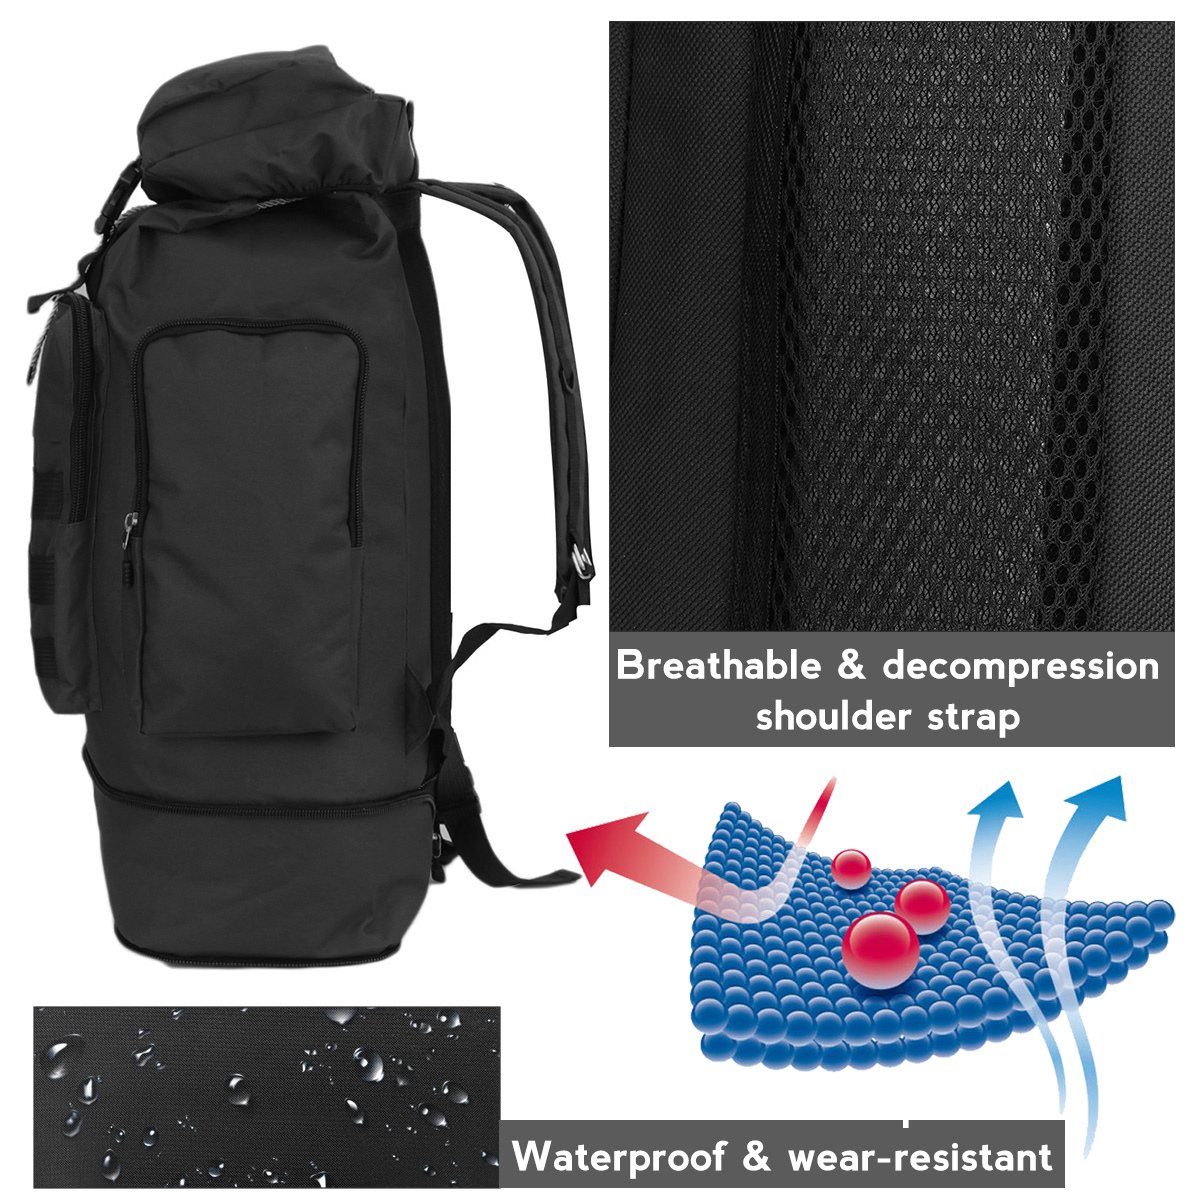 60L10L-Expanded-Large-Capacity-with-Mobile-Phone-Storage-Side-Bag-Outdoor-Hiking-Backpack-1869568-4